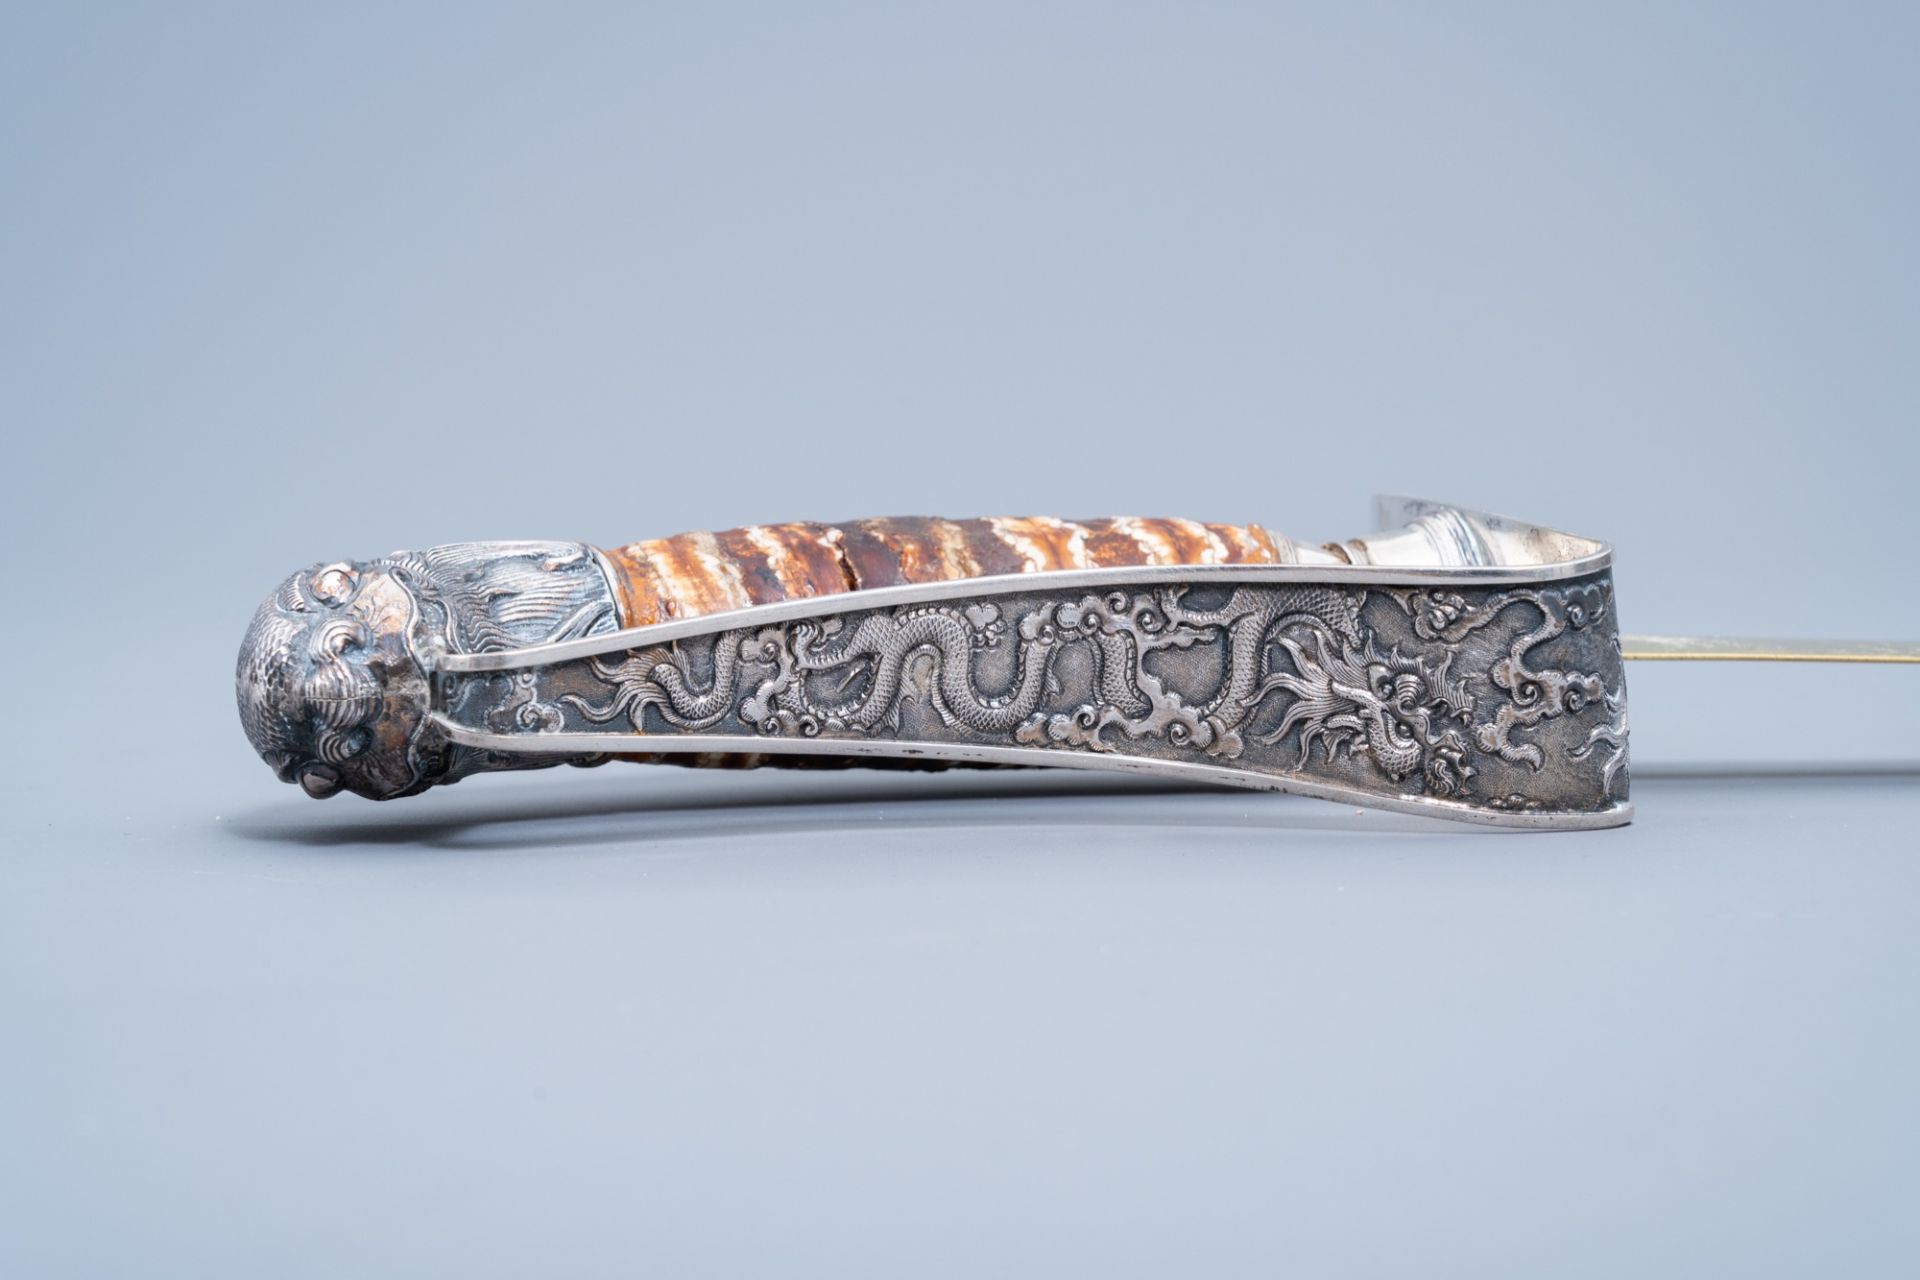 AÊ ceremonial Vietnamese 'guom' sword with silver and mother-of-pearl inlaid wooden scabbard with dr - Image 11 of 13